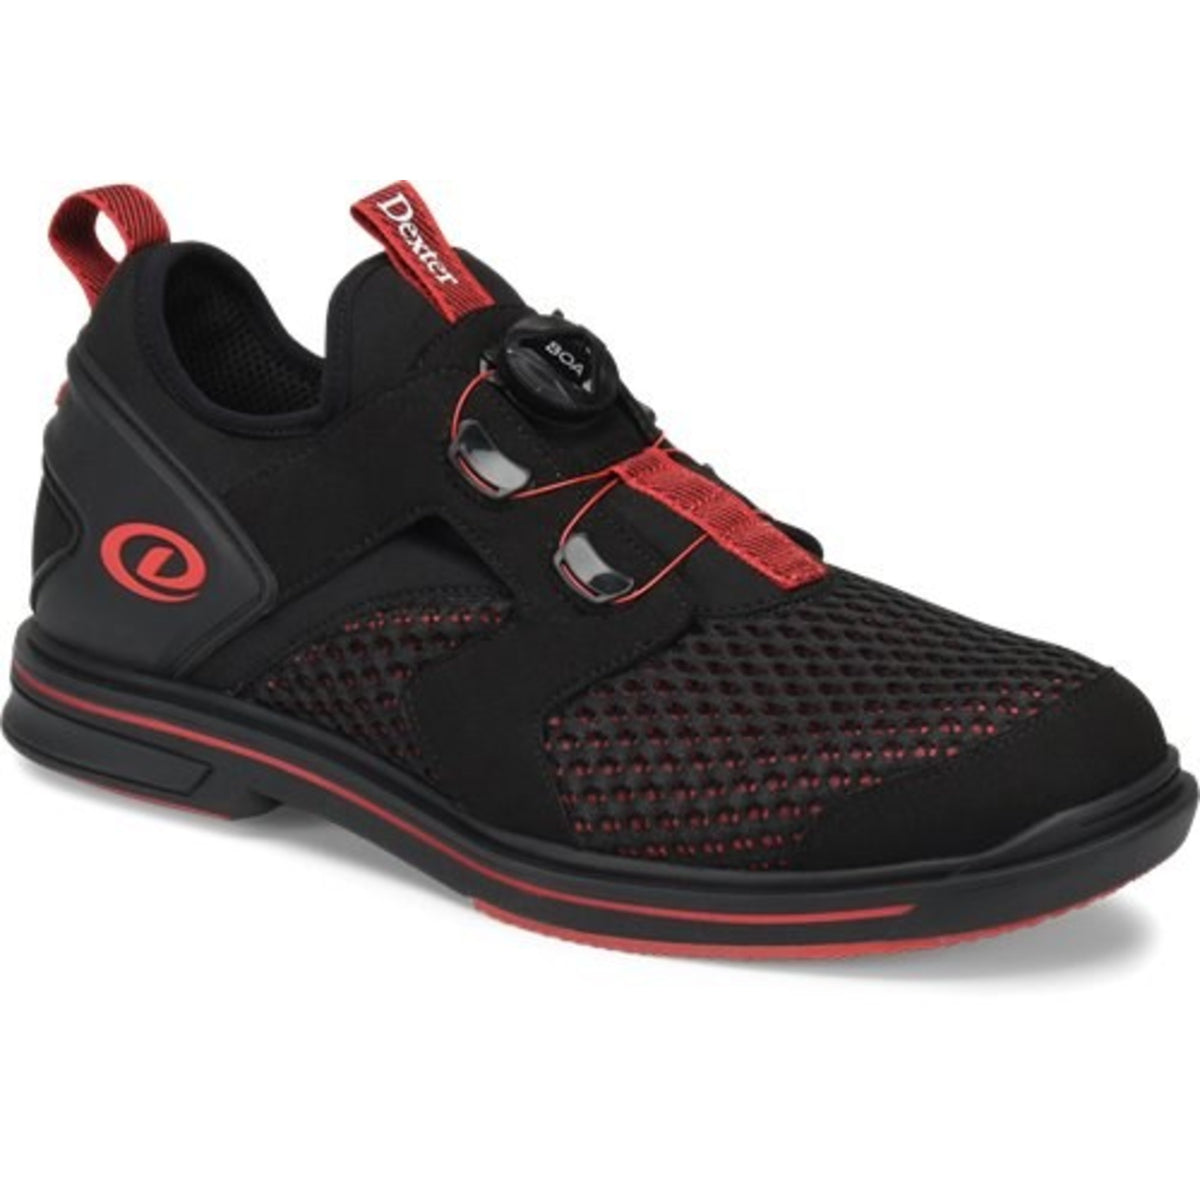 Pro Boa Black/Red Wide Shoes